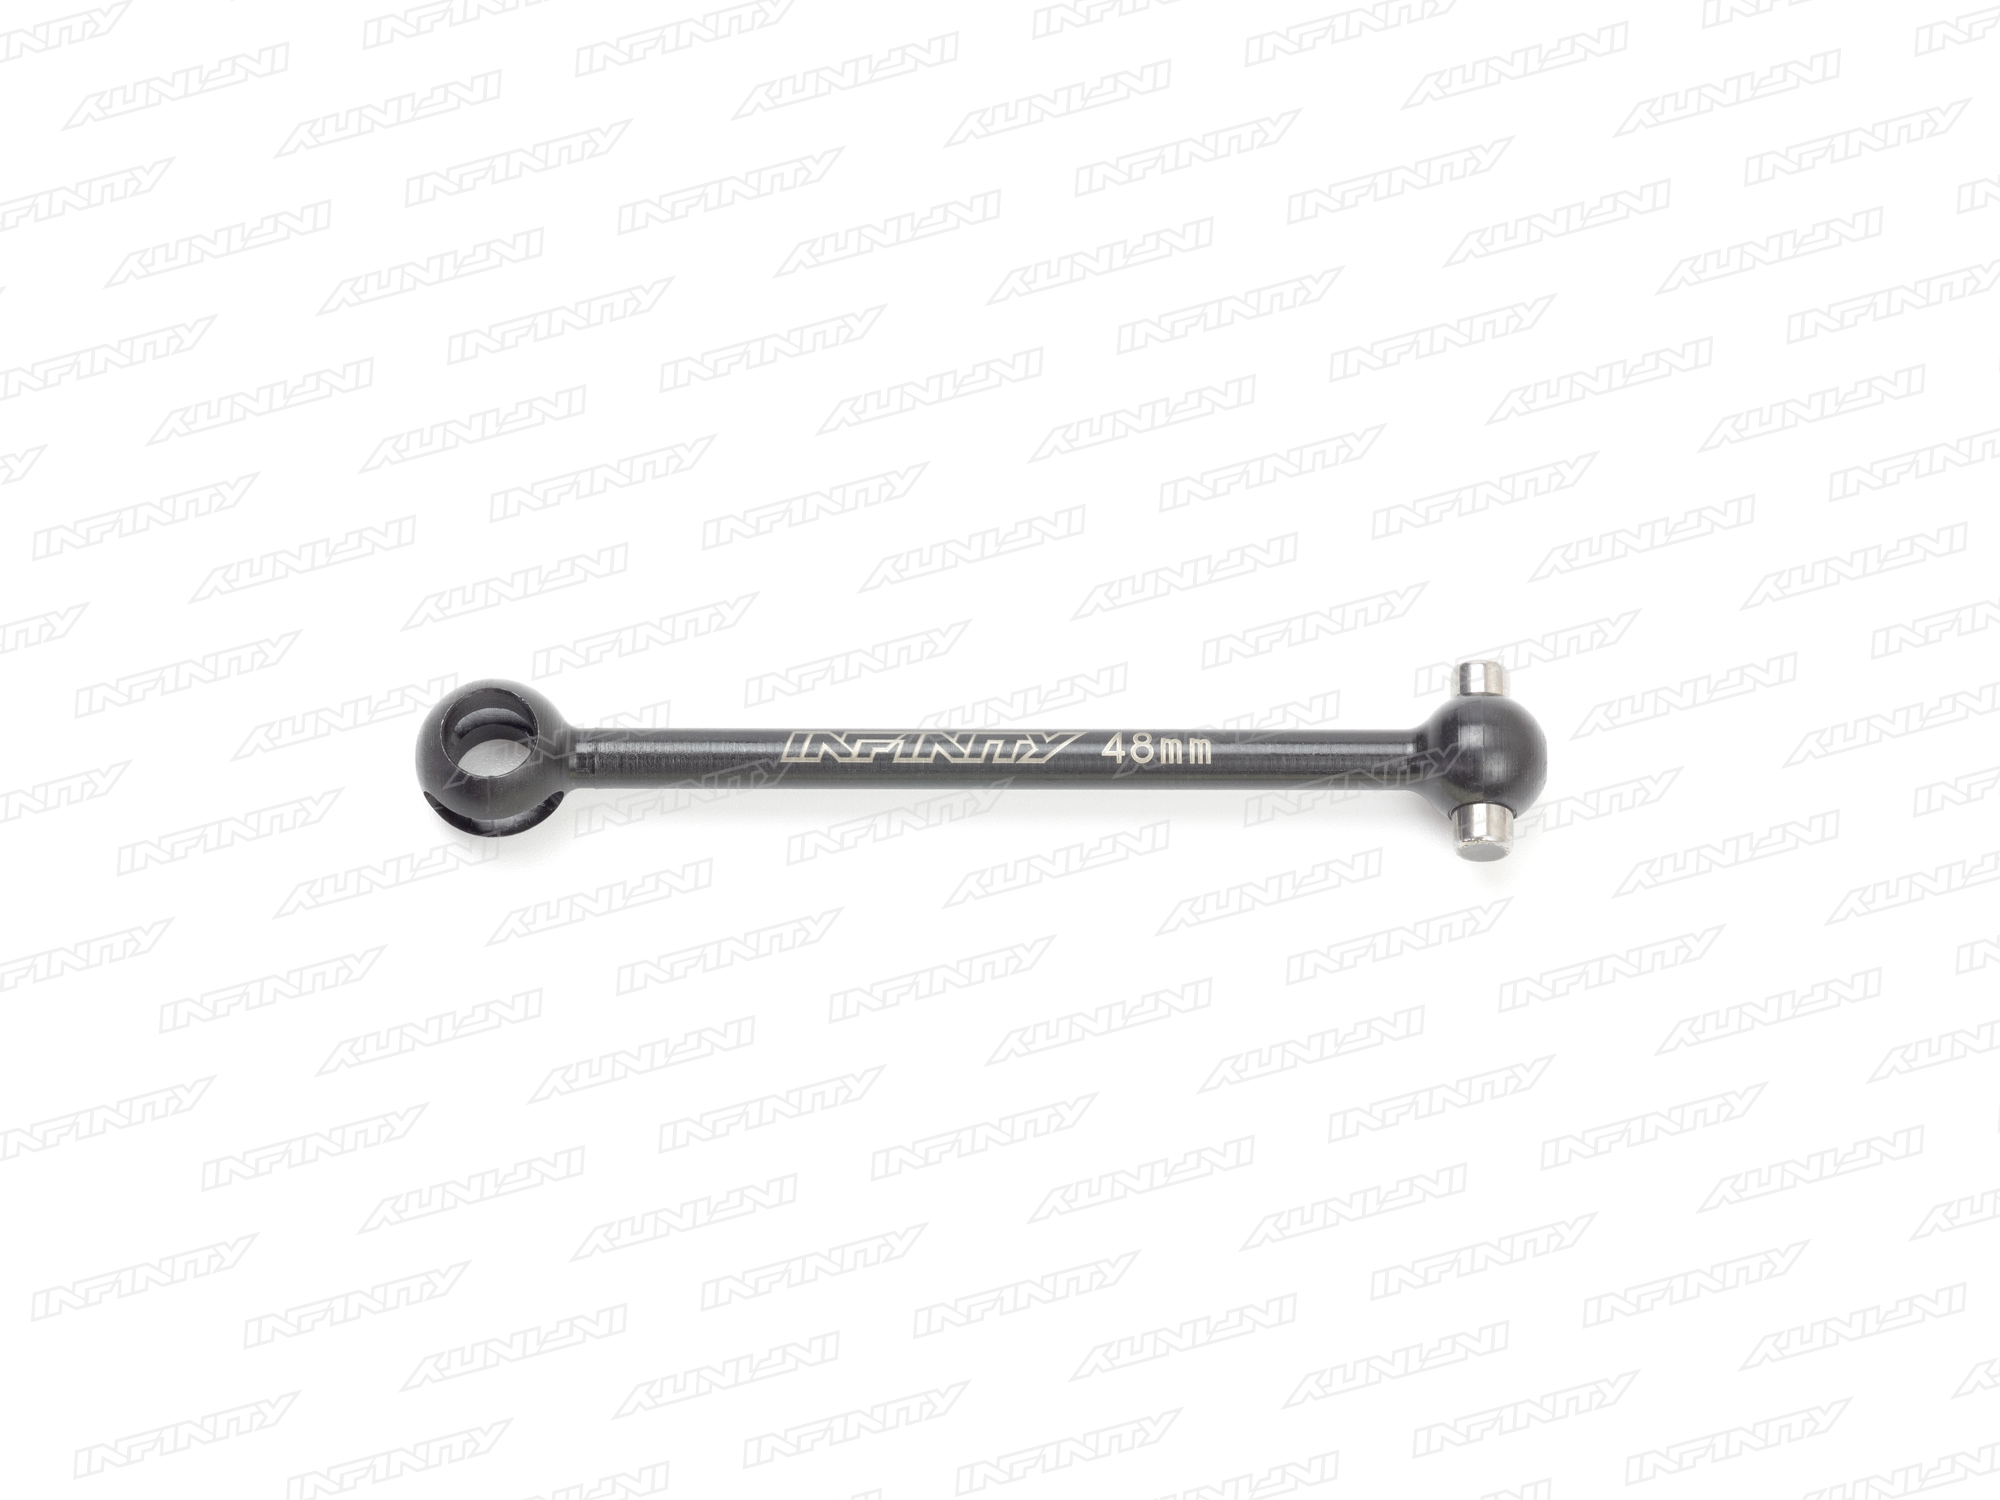 FRONT UNIVERSAL SHAFT(Parallel/48mm)